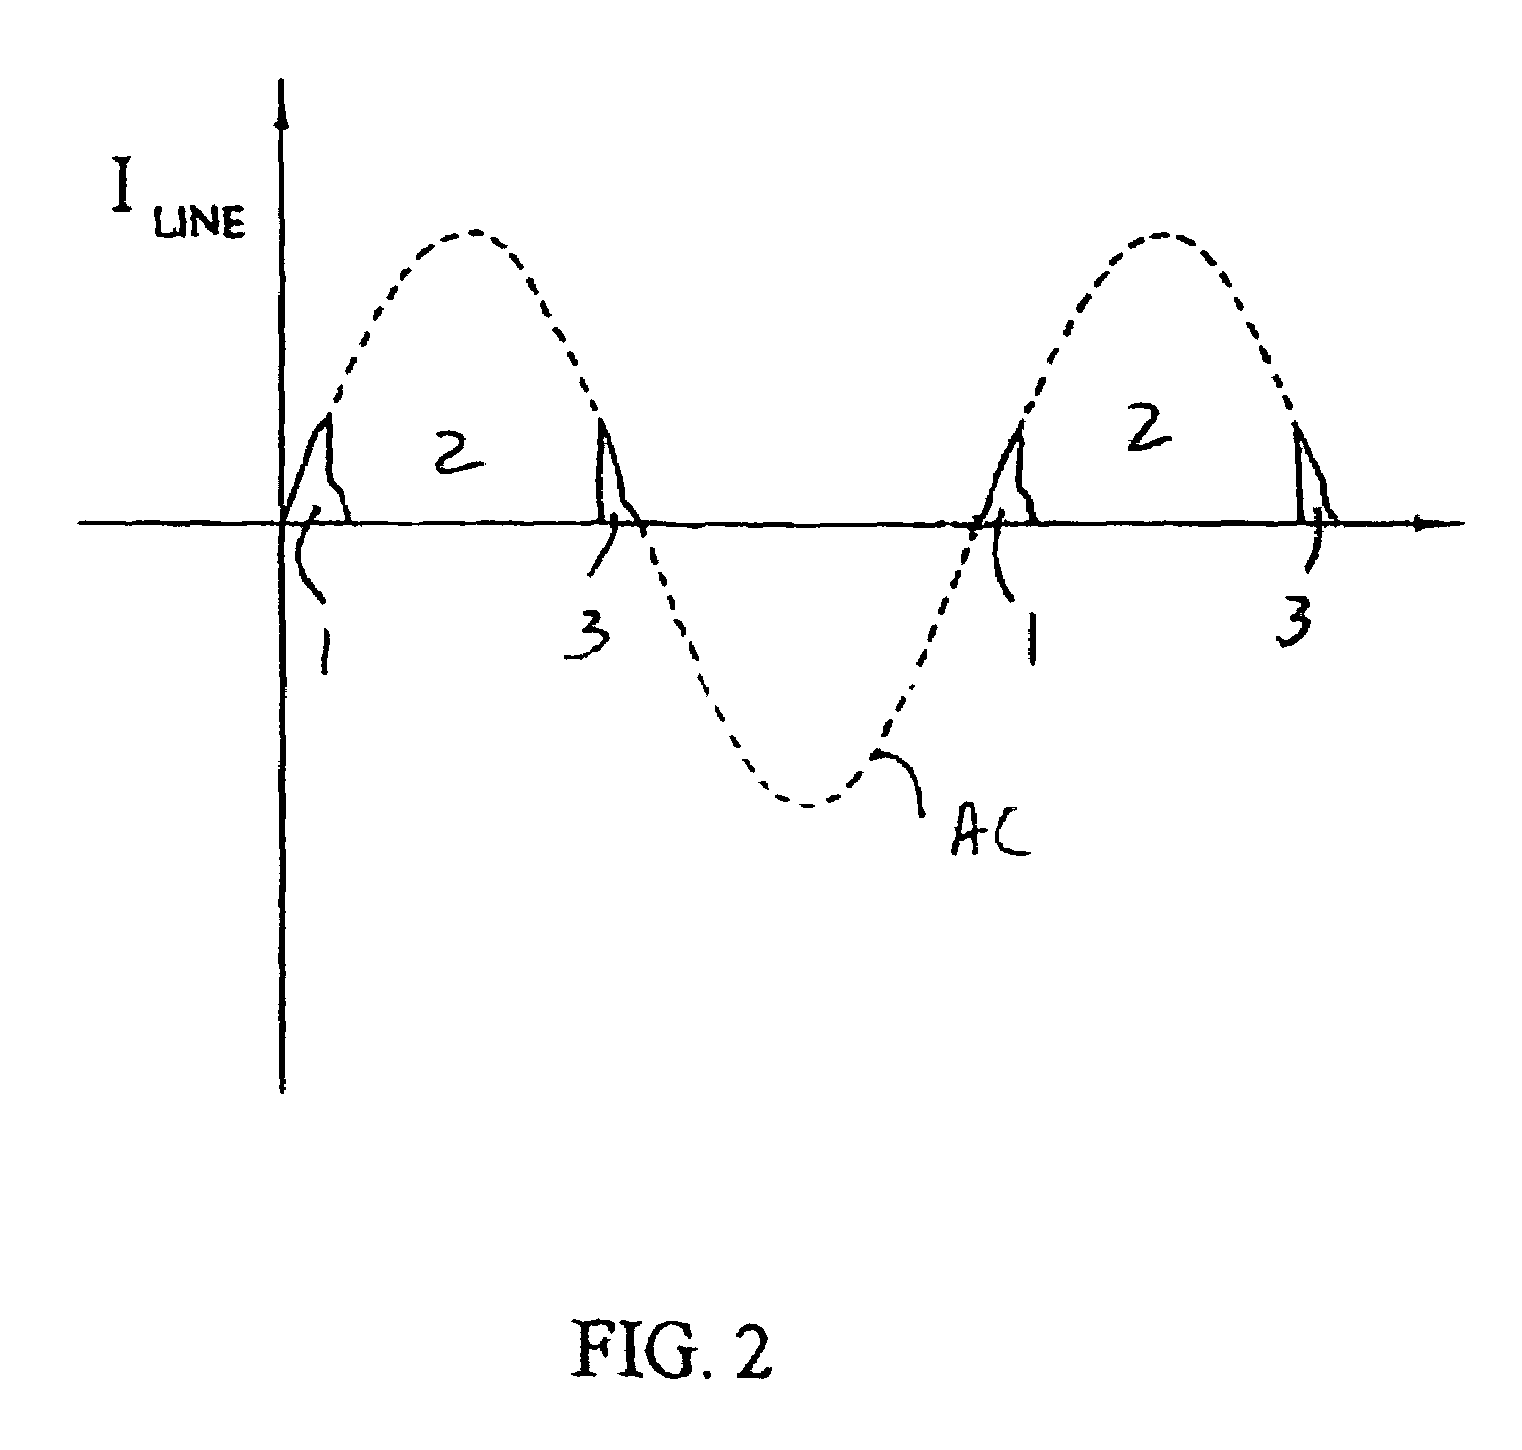 DV/dt-detecting overcurrent protection circuit for power supply